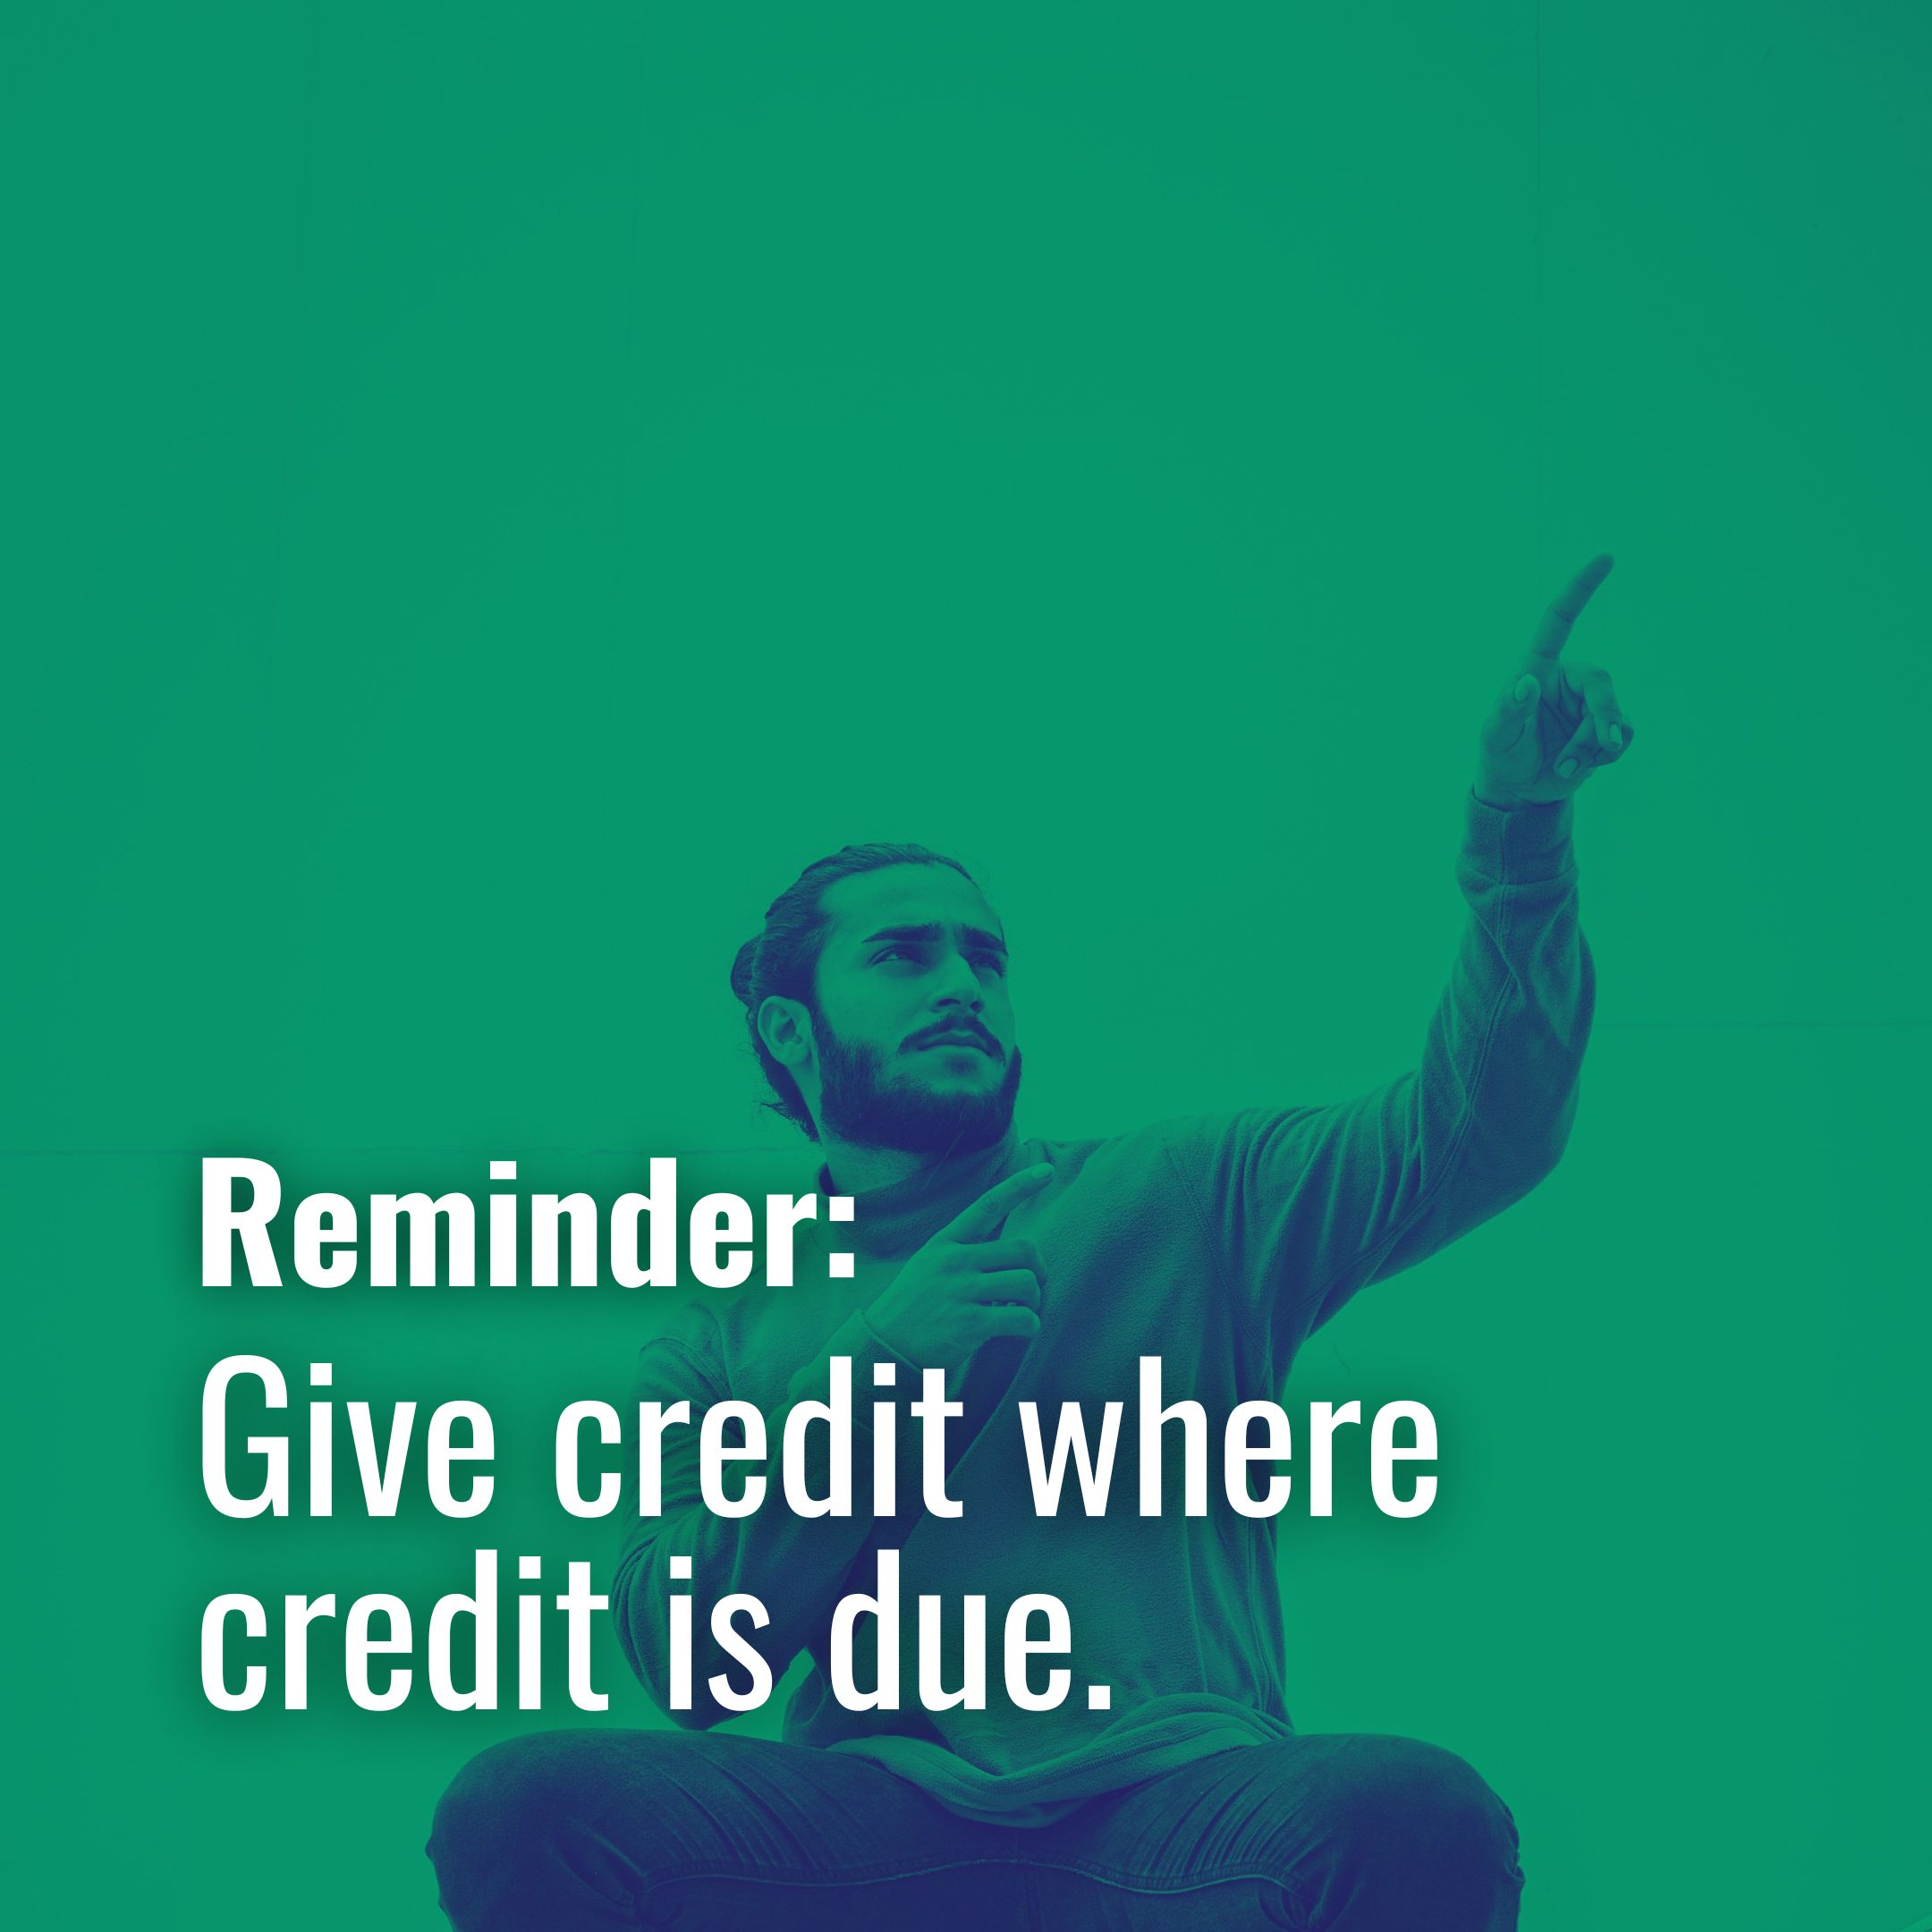 Give credit where credit is due.